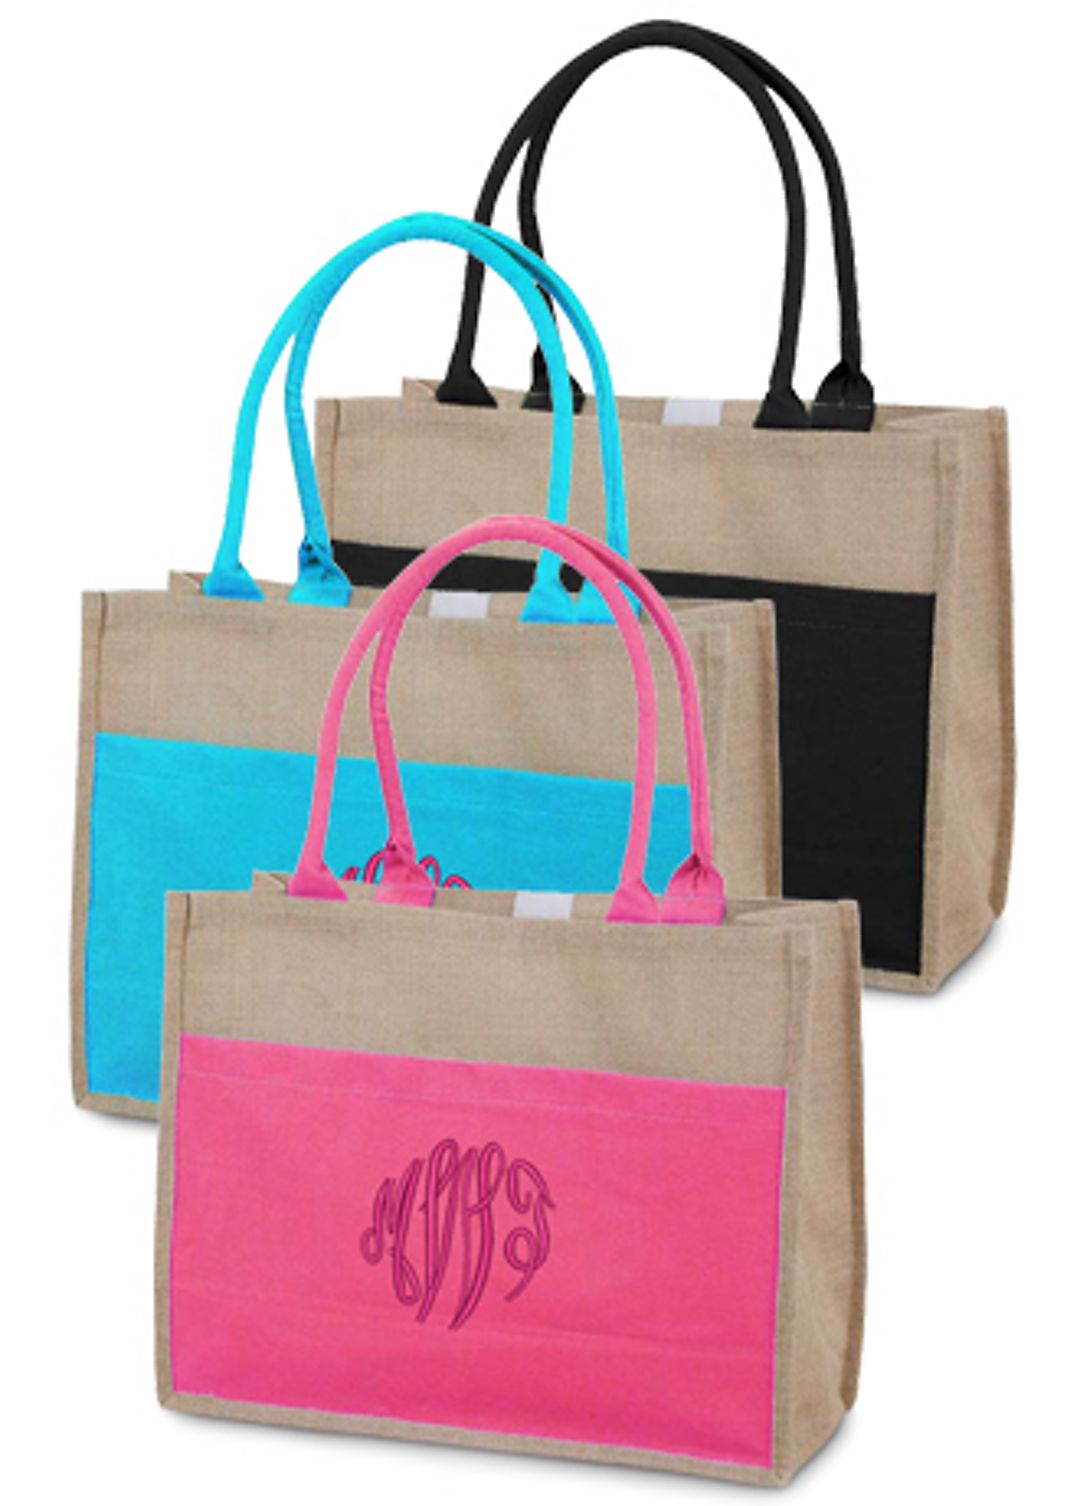 DB Exc Personalized Jute Tote with Canvas Pocket Image 2